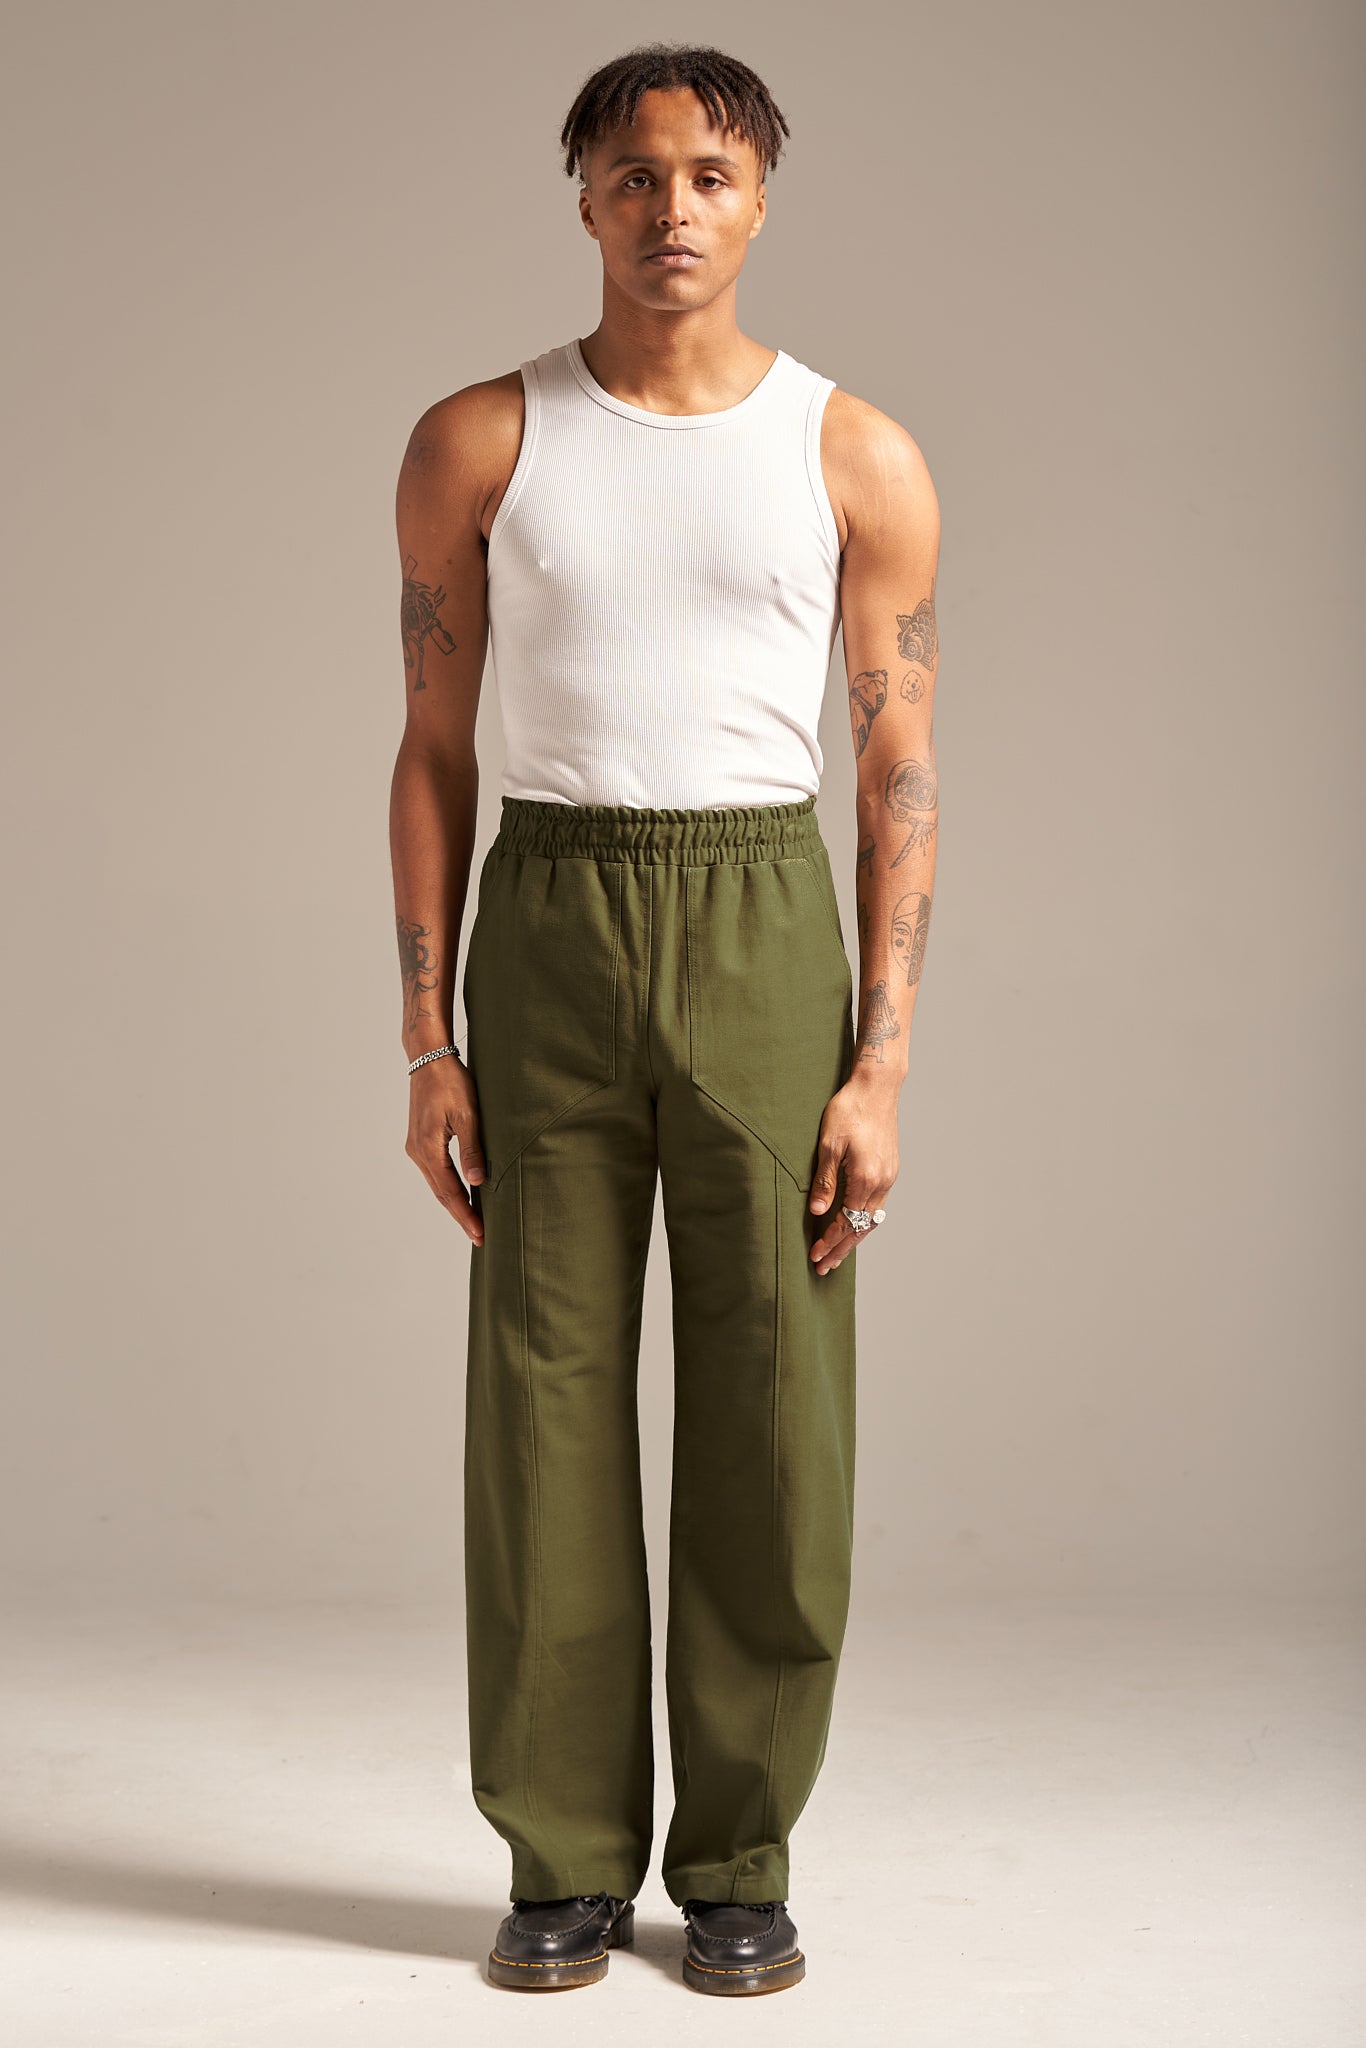 The Olive '23 Staple Pant